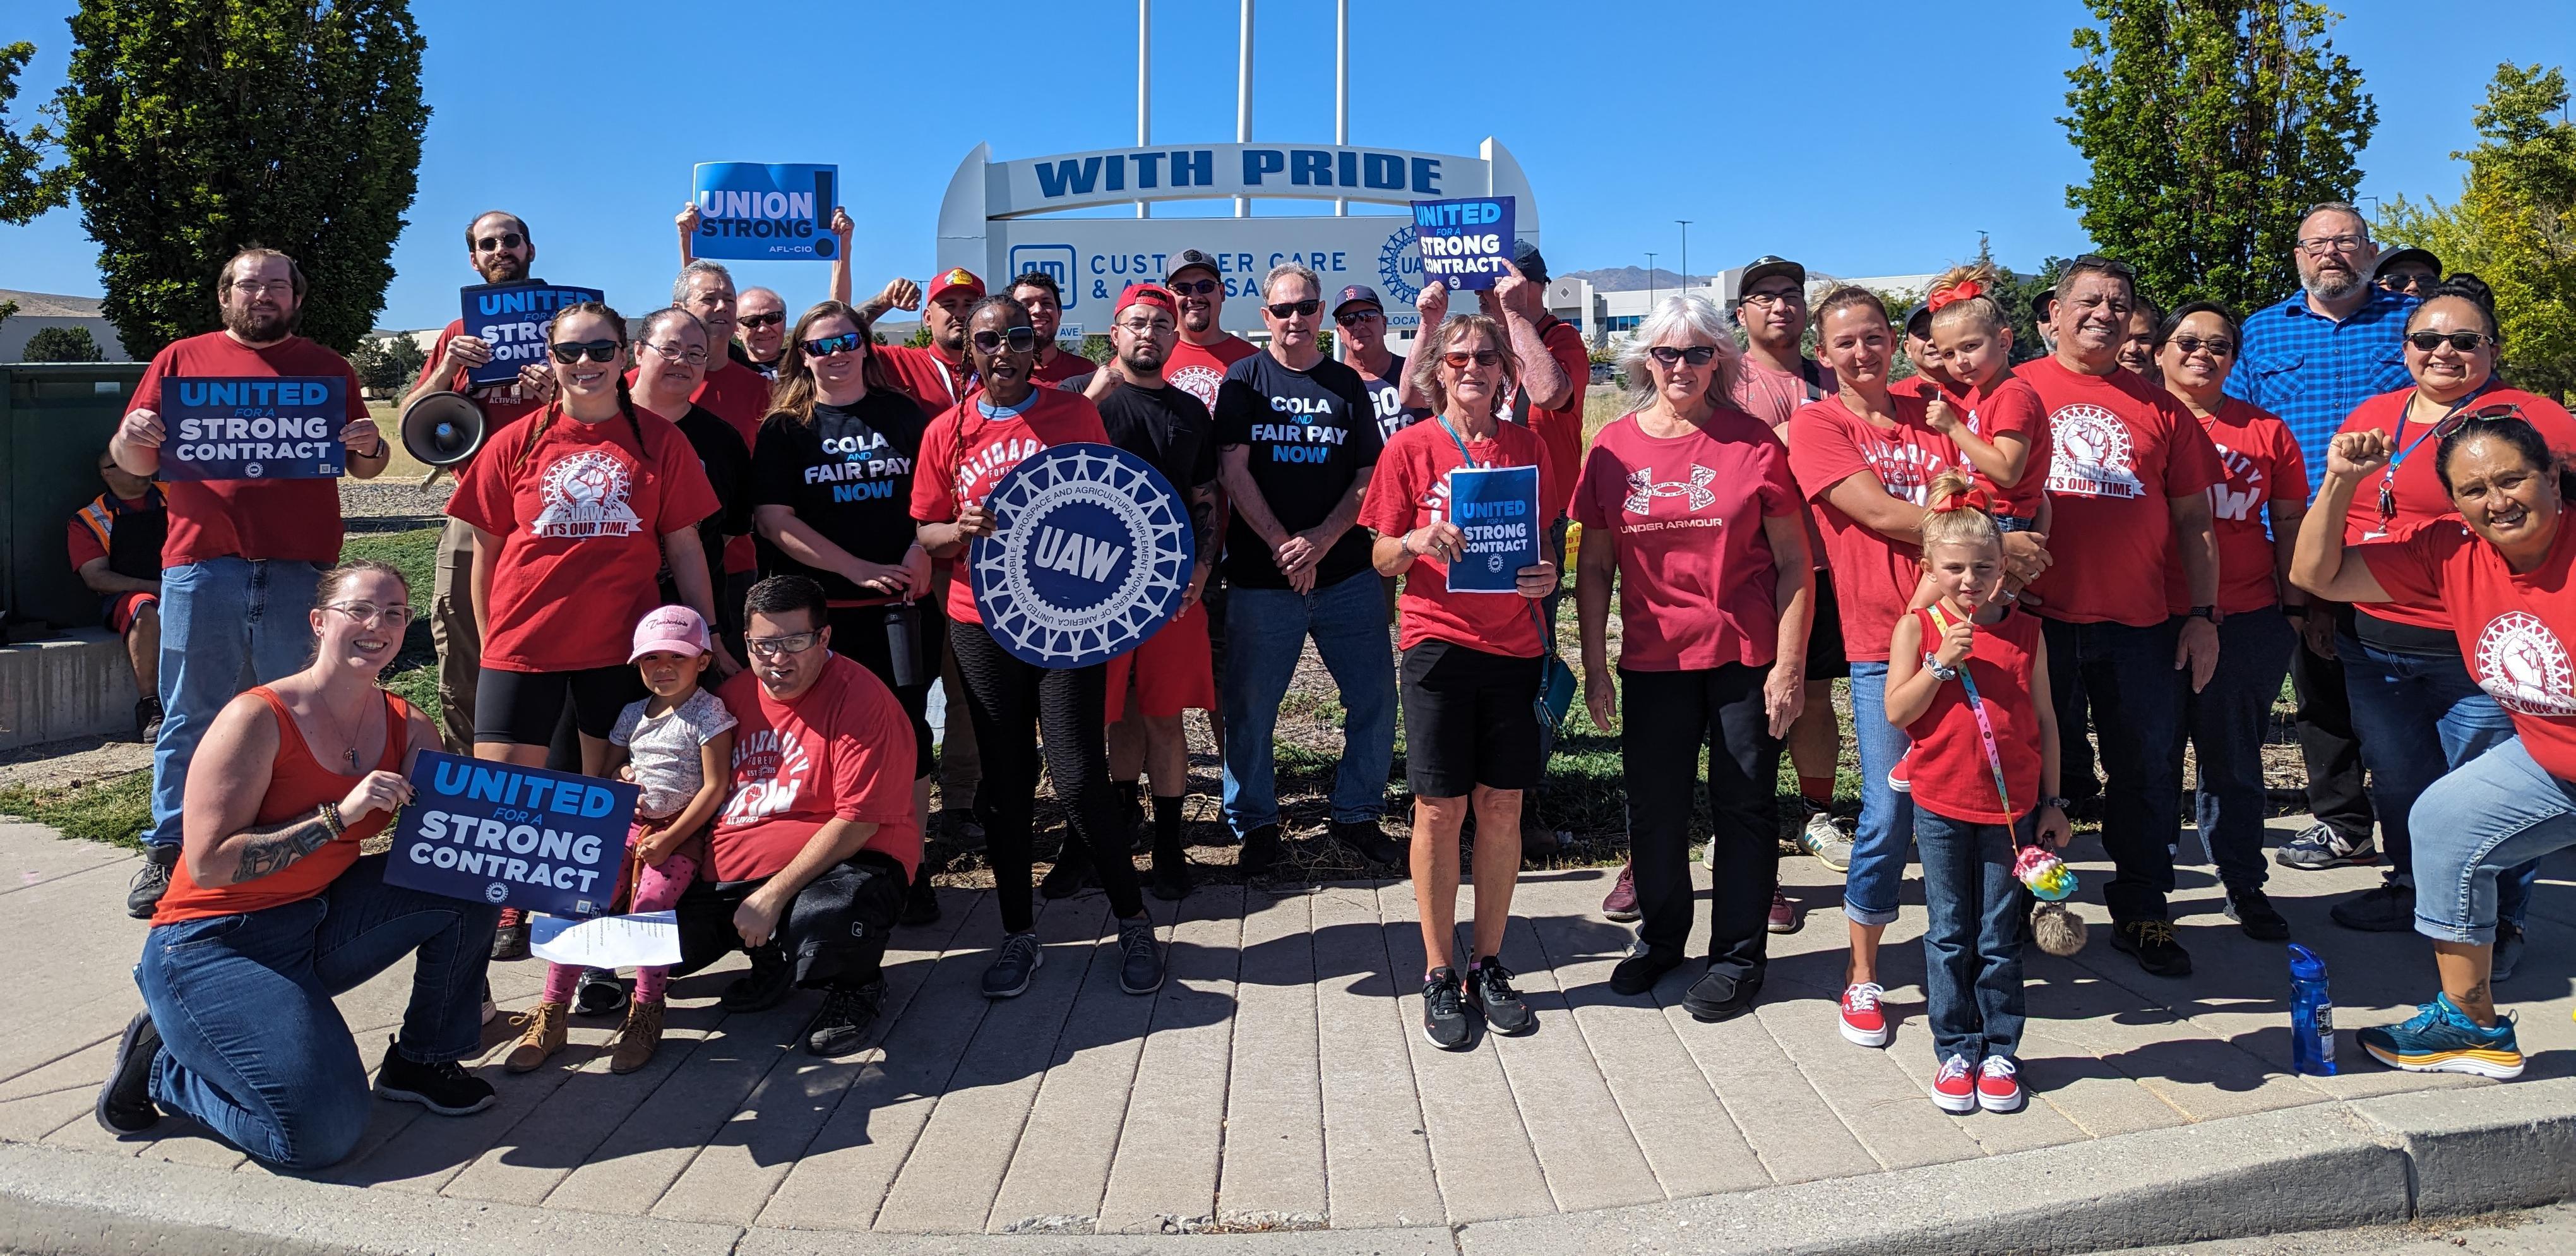 About 30 UAW 2162 members wearing red shirts pose with UAW signs. 